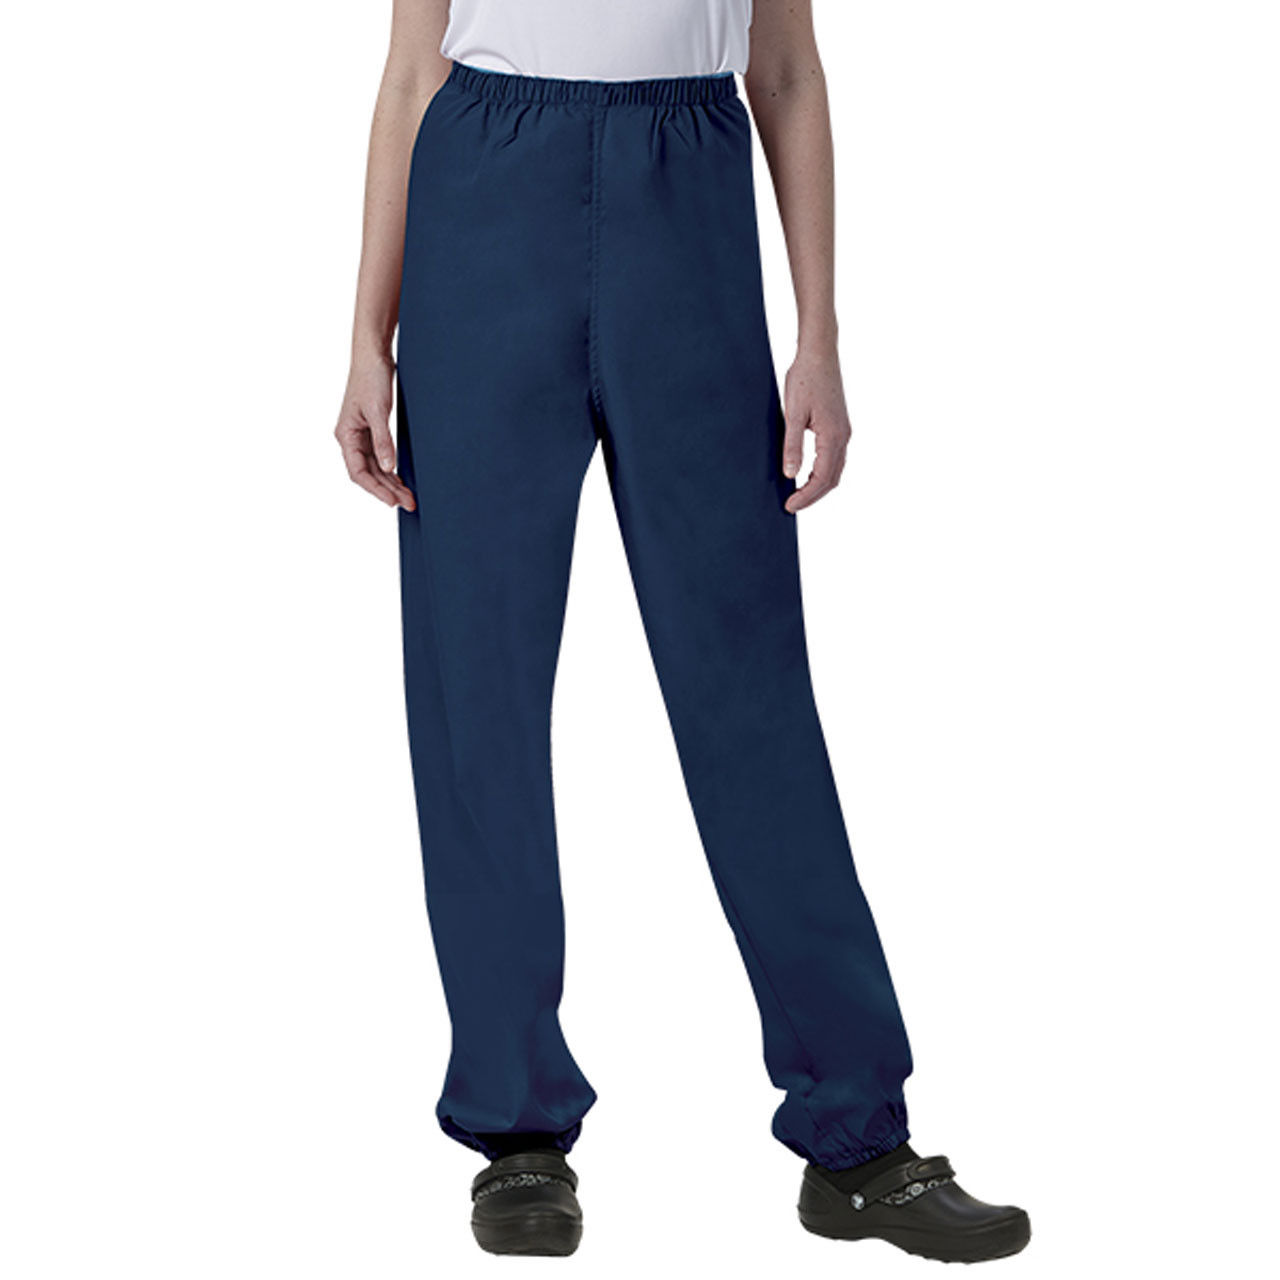 Are these fashion seal healthcare scrub pants unisex?